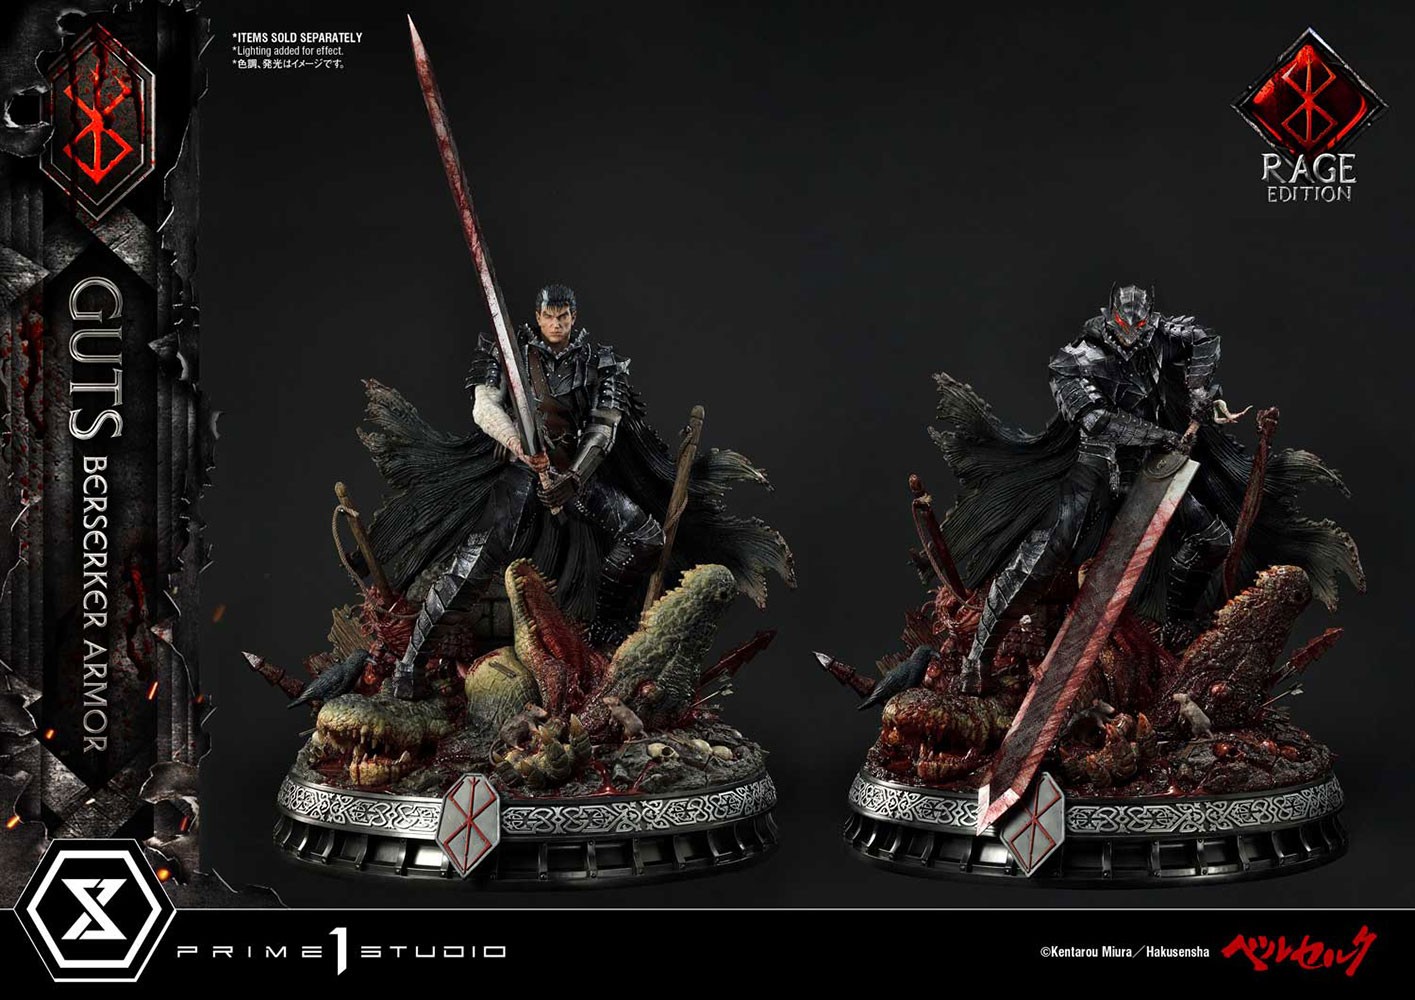 Guts Berserker Armor (Rage Edition) Collector Edition (Prototype Shown) View 51